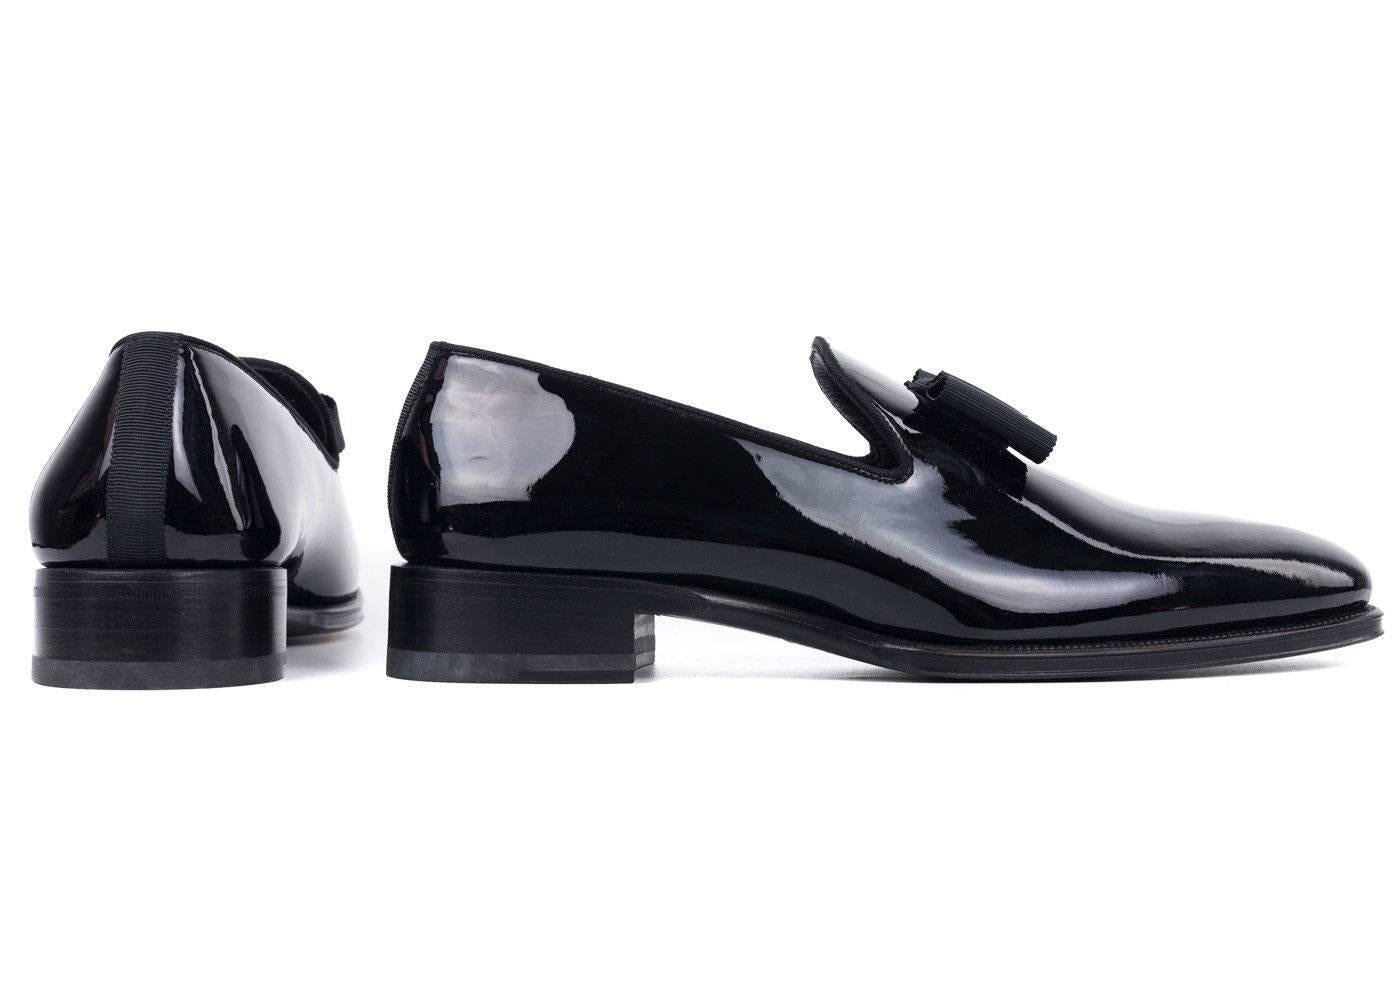 DSquared2 Men's Black Patent Tuxedo Slip On Loafers In New Condition For Sale In Brooklyn, NY